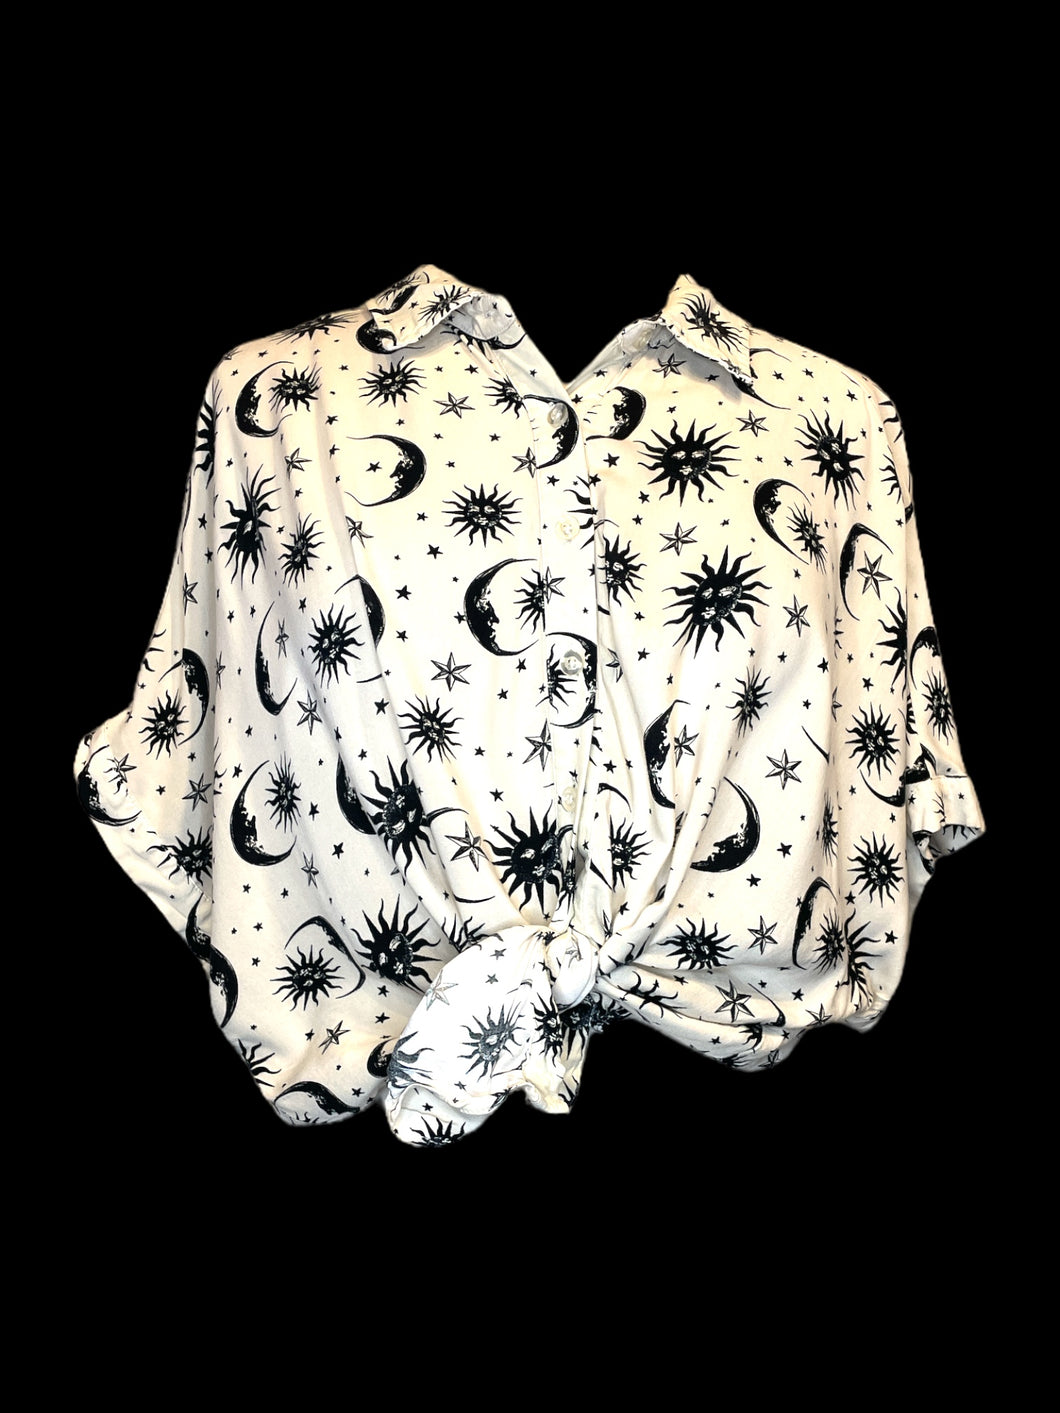 2X Off-white & black celestial pattern short sleeve button down crop top w/ johnny collar, & tie front